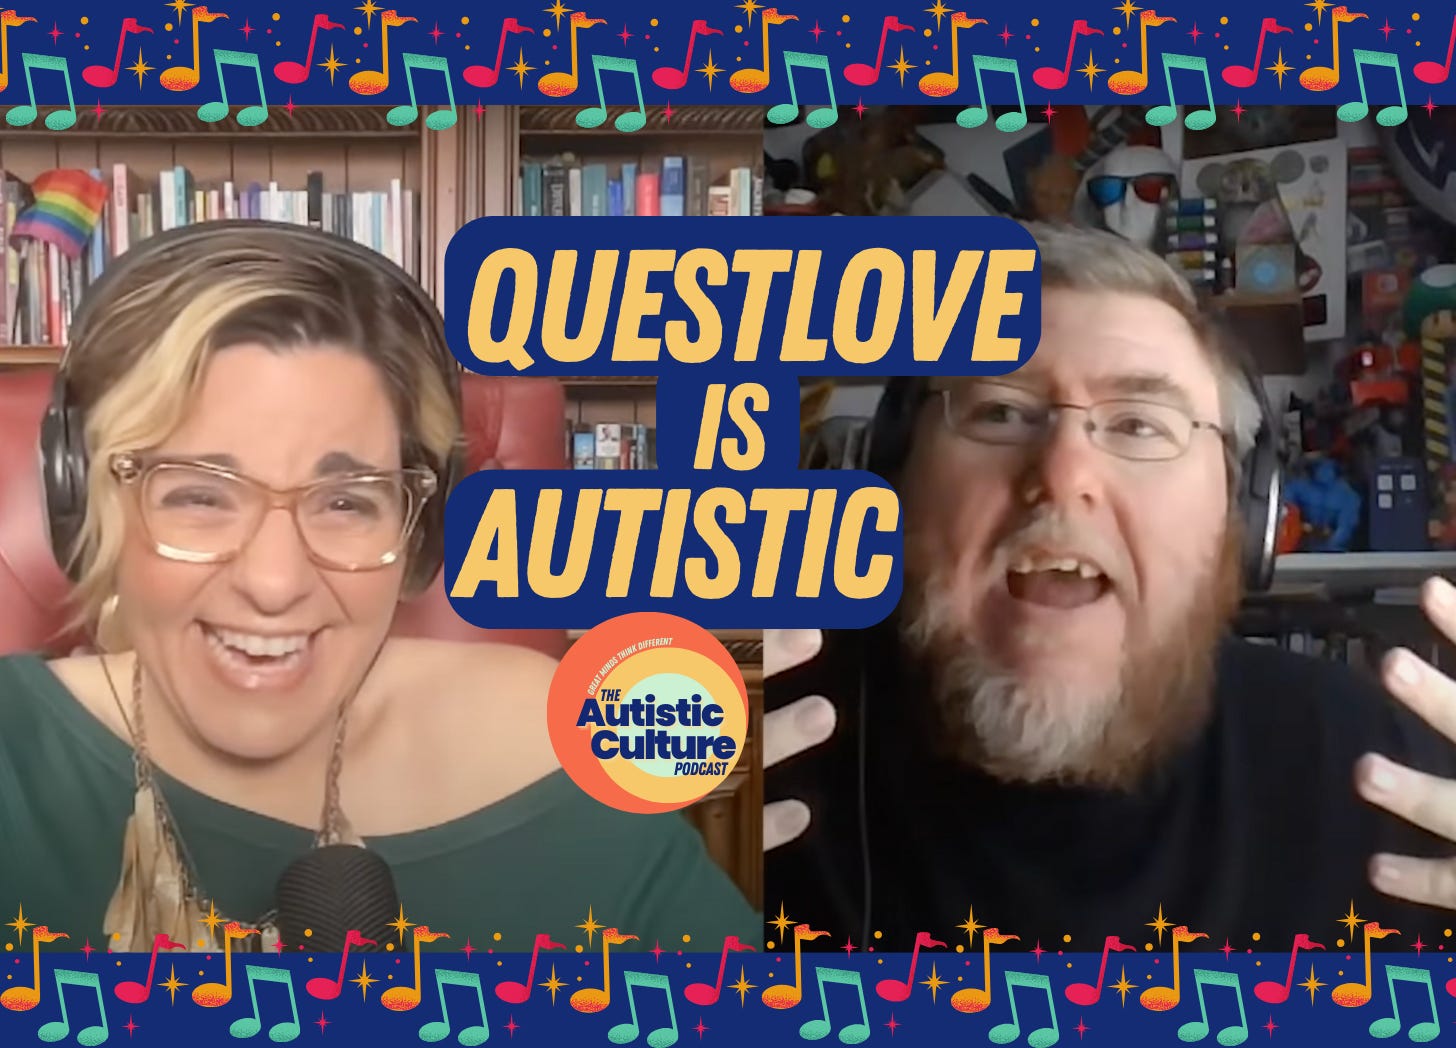 Listen to Autistic podcast hosts discuss: Questlove is Autistic. Autism podcast | Join us as we dive into how autism has helped this Autistic musician and Autistic celebrity rise to (well-deserved) icon status. 